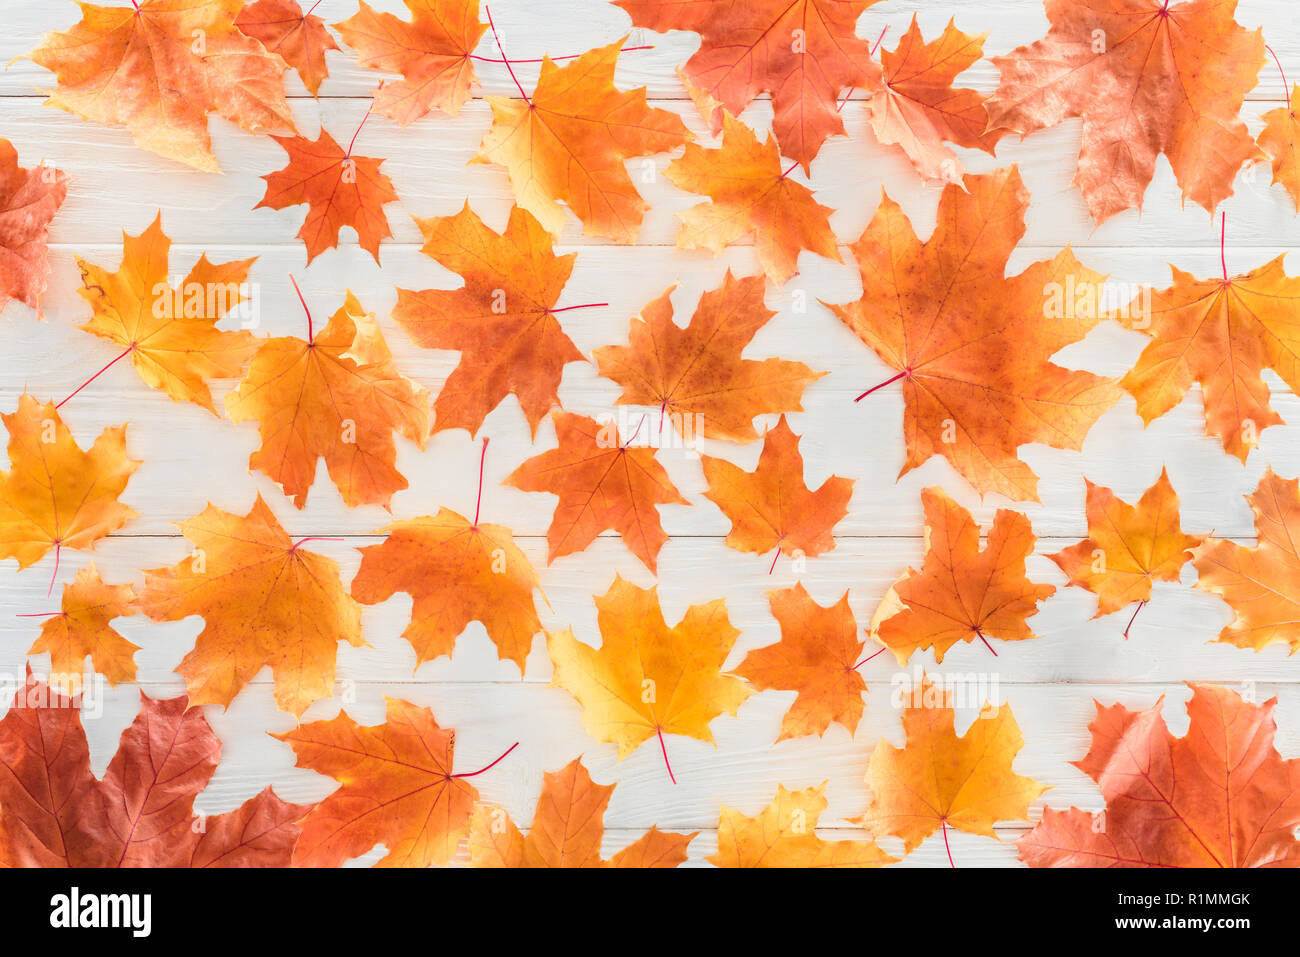 top view of orange autumnal maple leaves on wooden surface Stock Photo